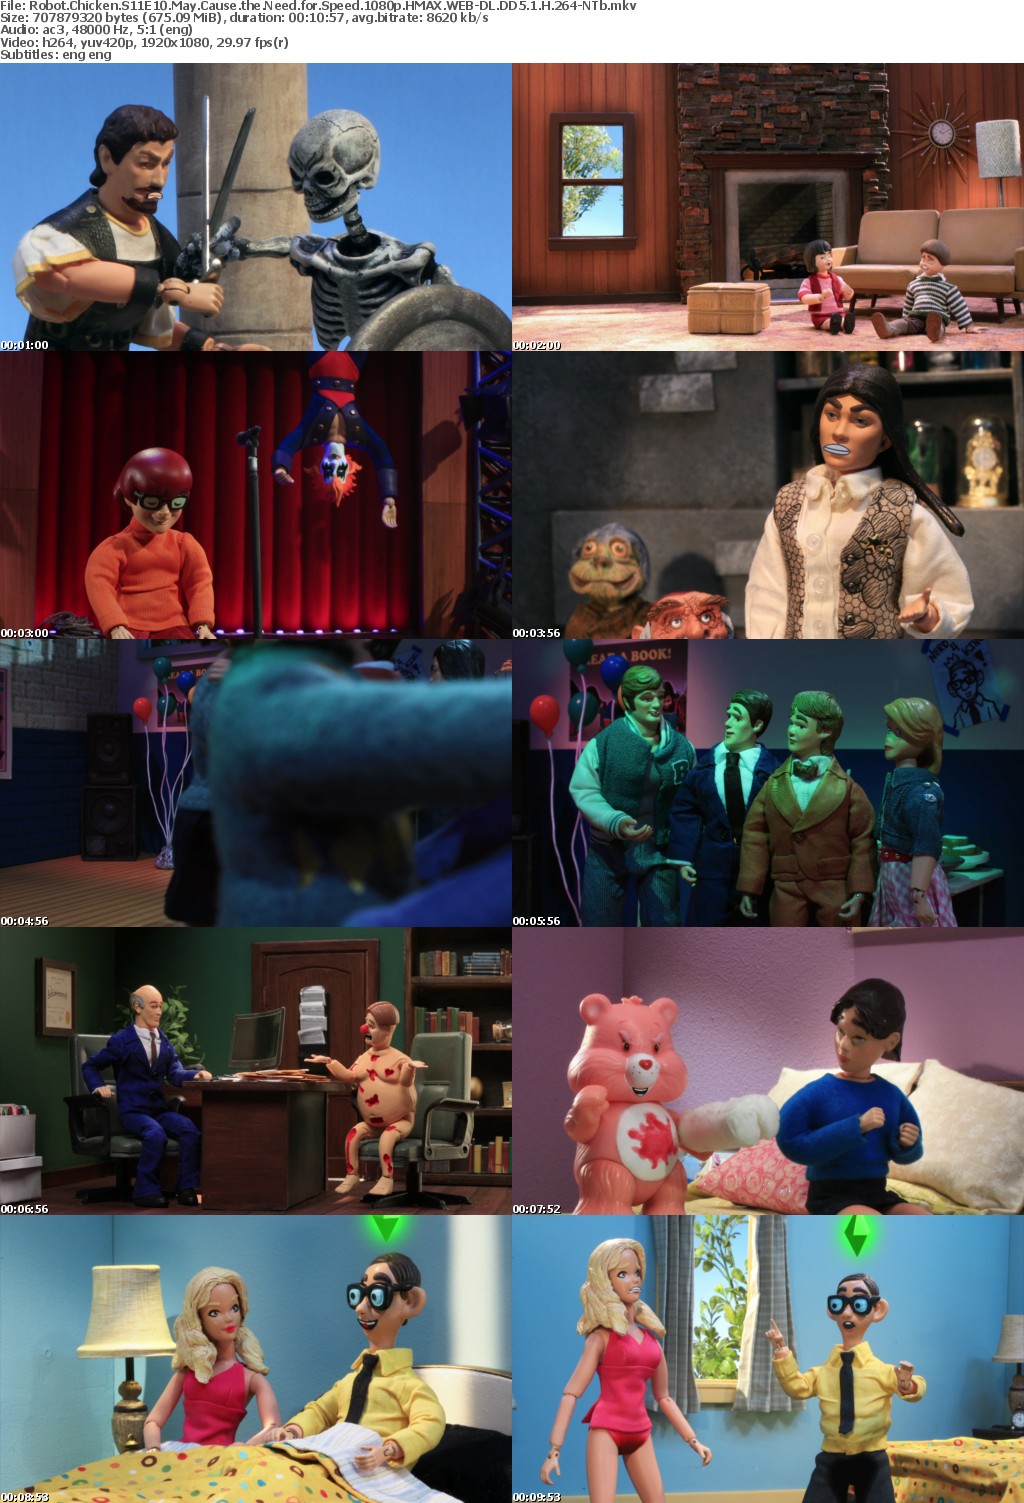 Robot Chicken S11E10 May Cause the Need for Speed 1080p HMAX WEBRip DD5 1 x264-NTb